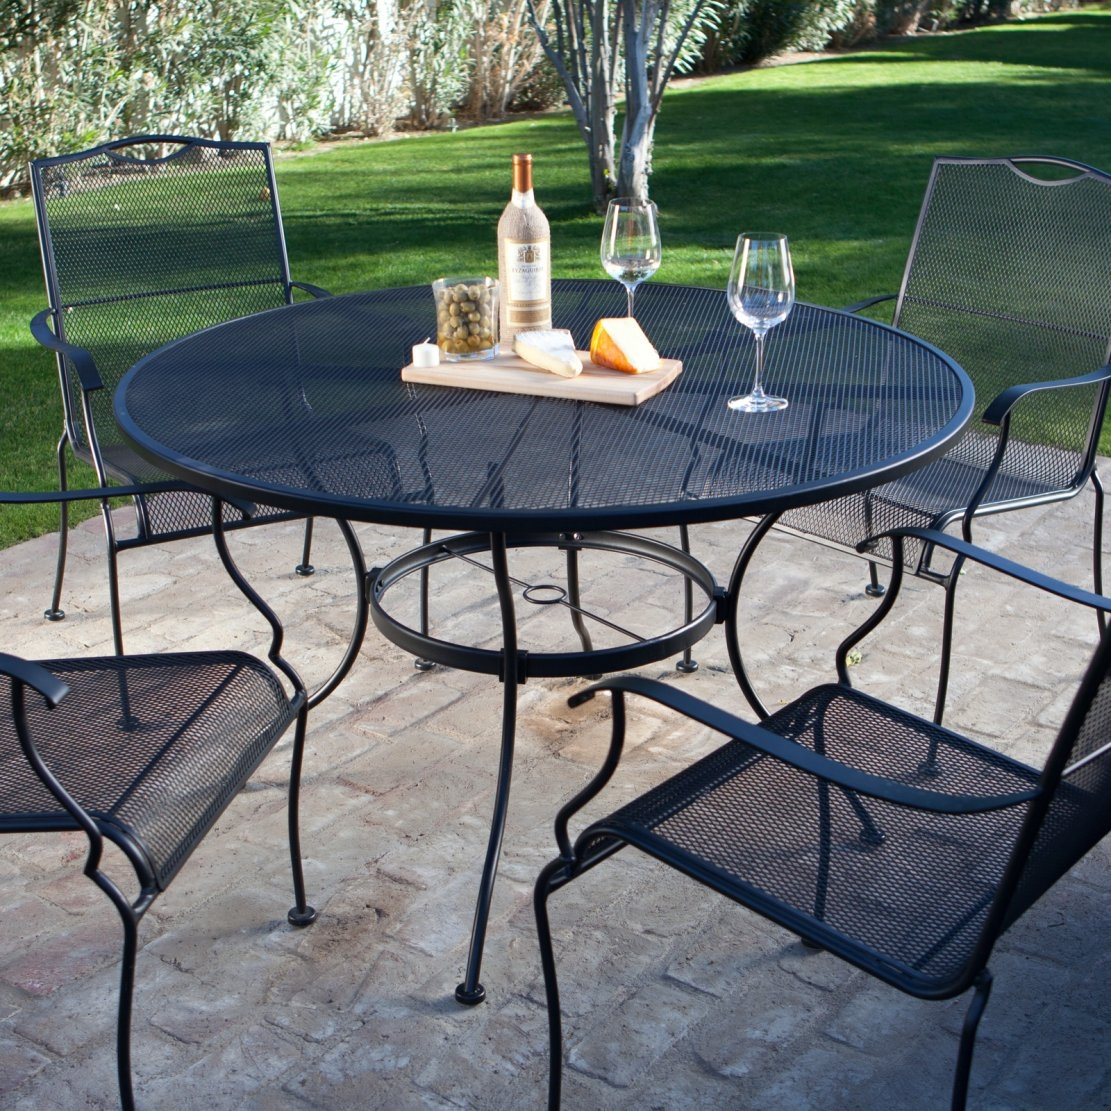 5 Piece Wrought Iron Patio Furniture Dining Set Seats 4 Best intended for proportions 1111 X 1111